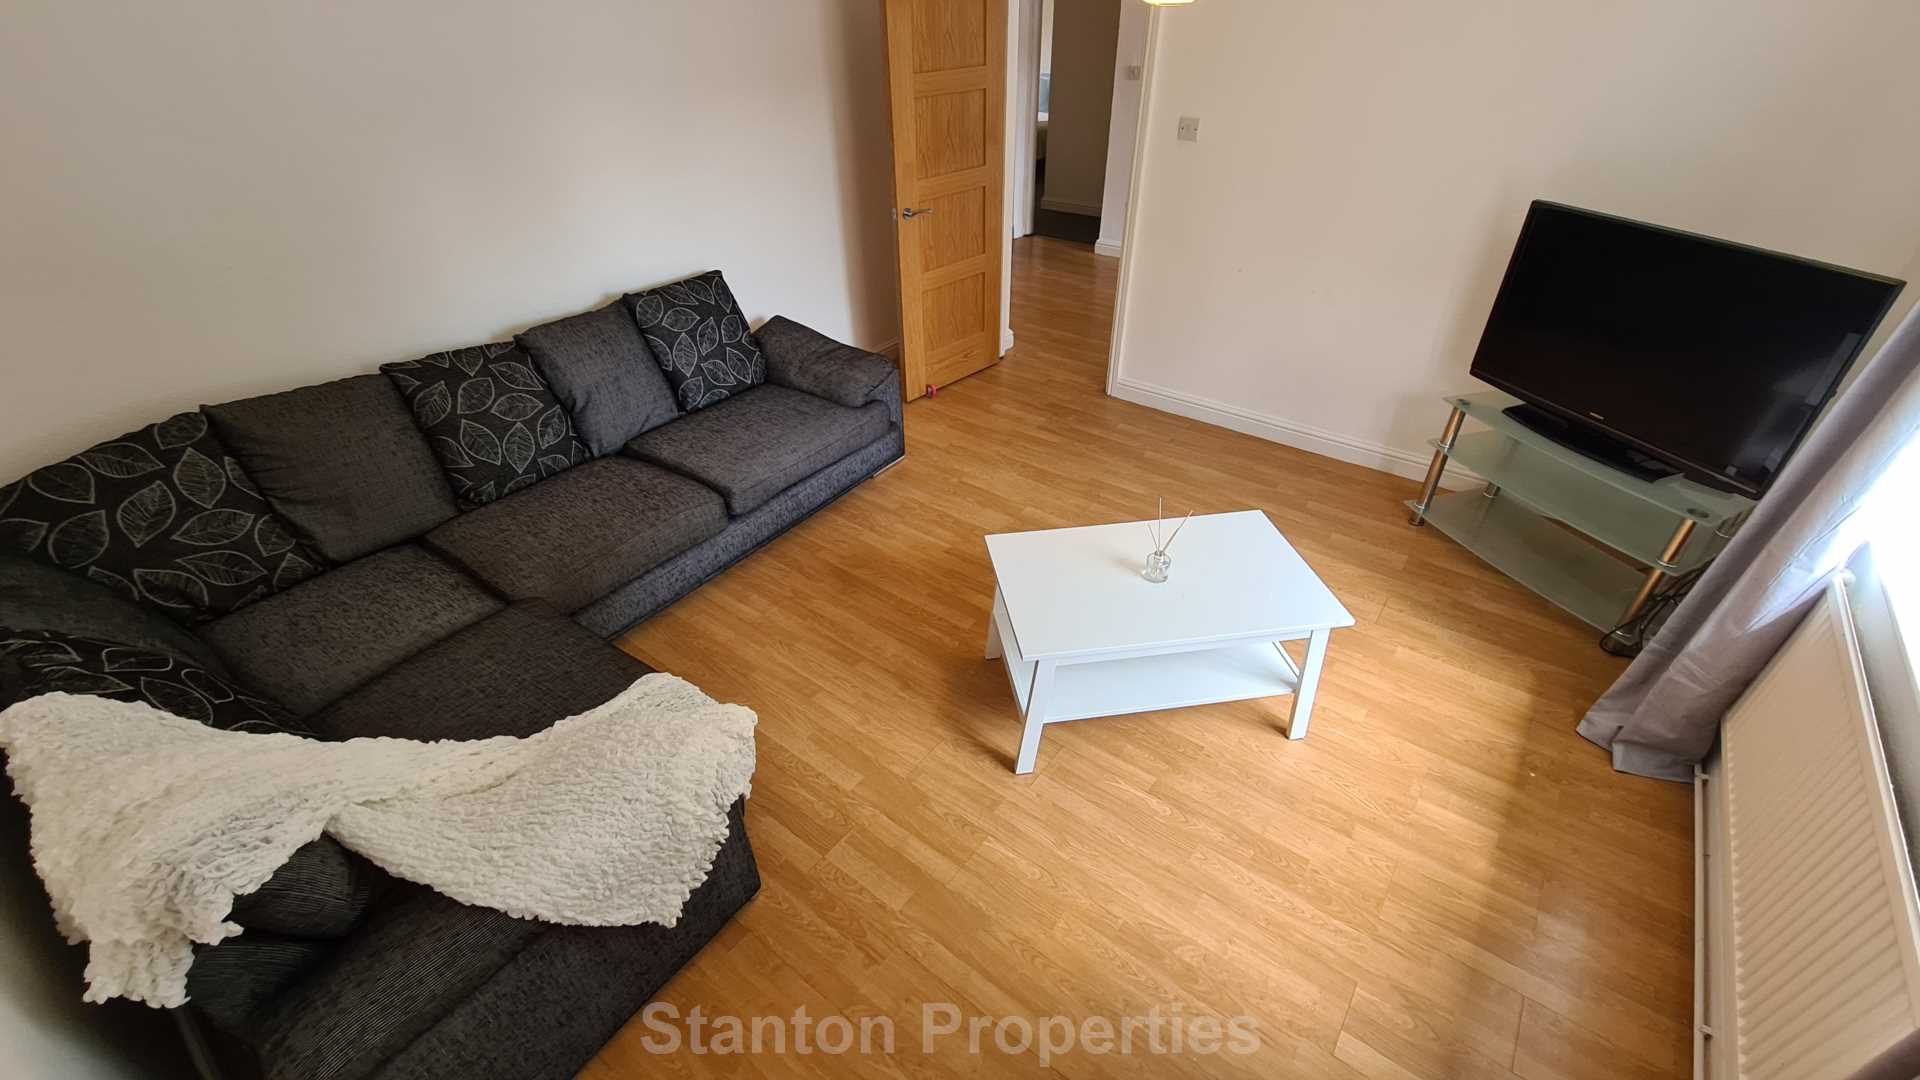 £155 pppw, See Video Tour, Granville Road, Fallowfield, Image 2